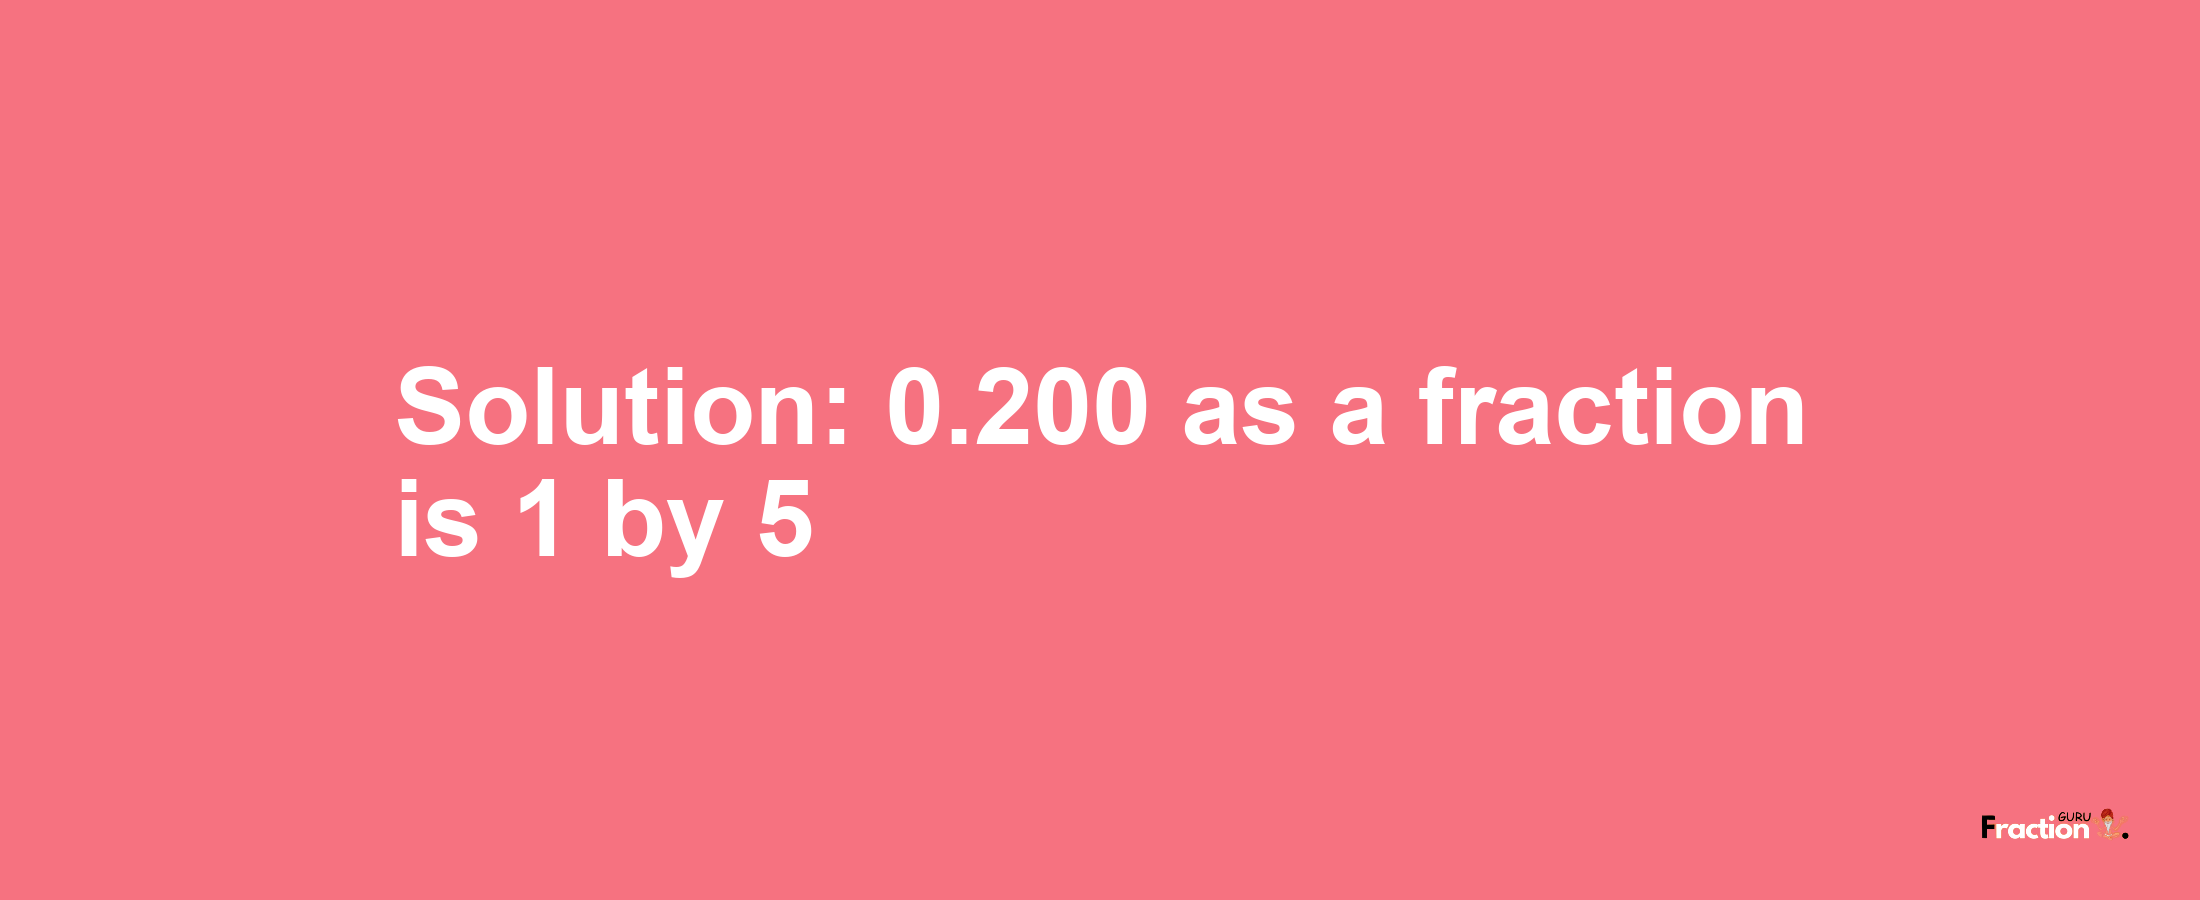 Solution:0.200 as a fraction is 1/5